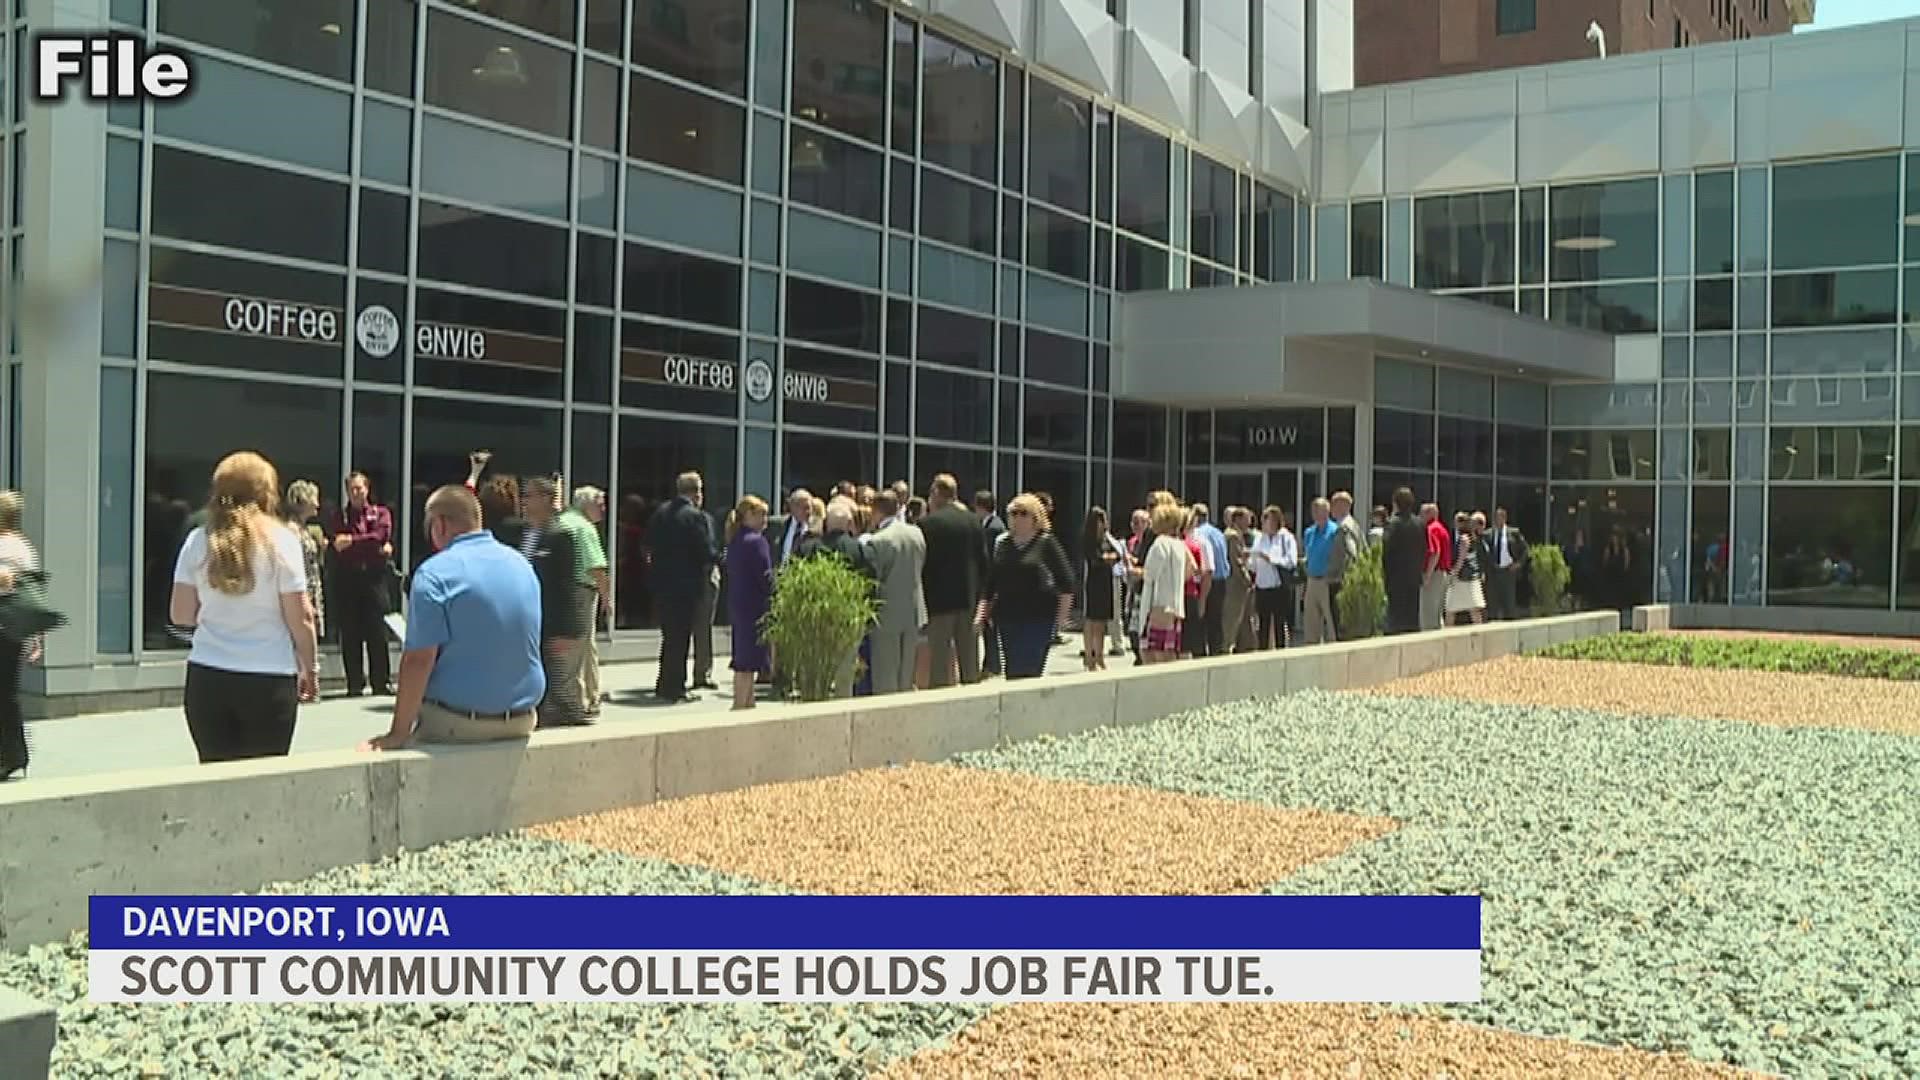 Over 20 employers will be in attendance at the job fair Tuesday afternoon at Scott Community College's Urban Campus.